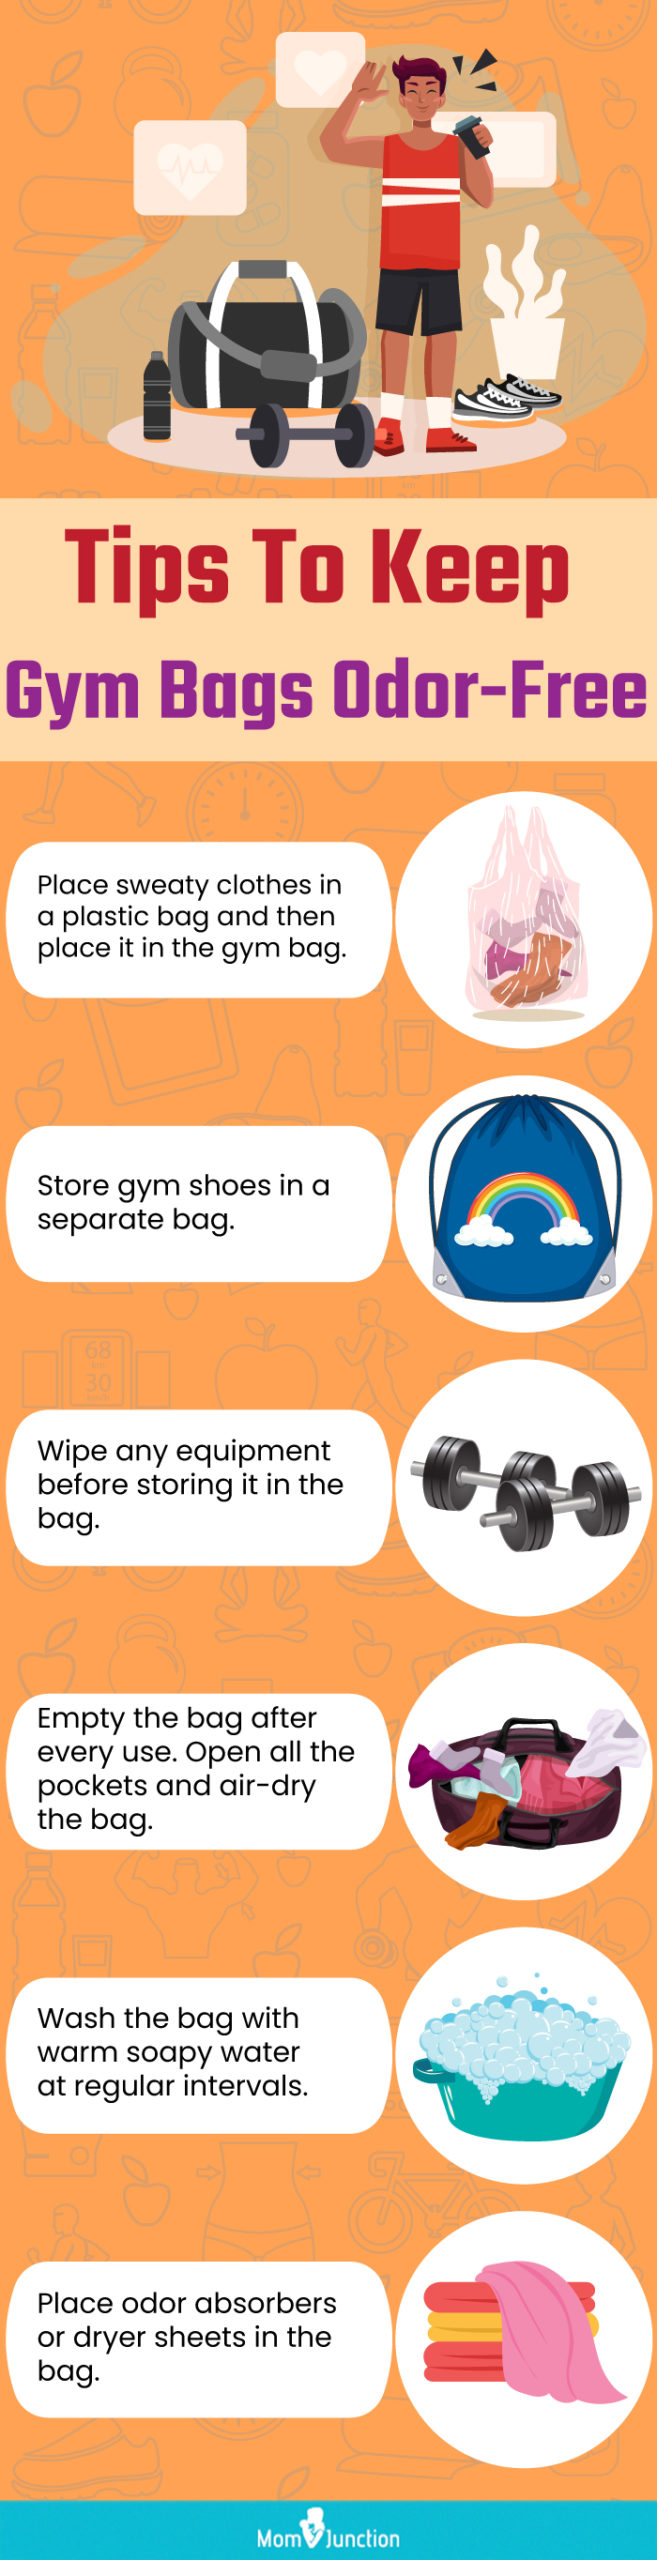 Tips To Keep Gym Bags Odor Free(infographic)